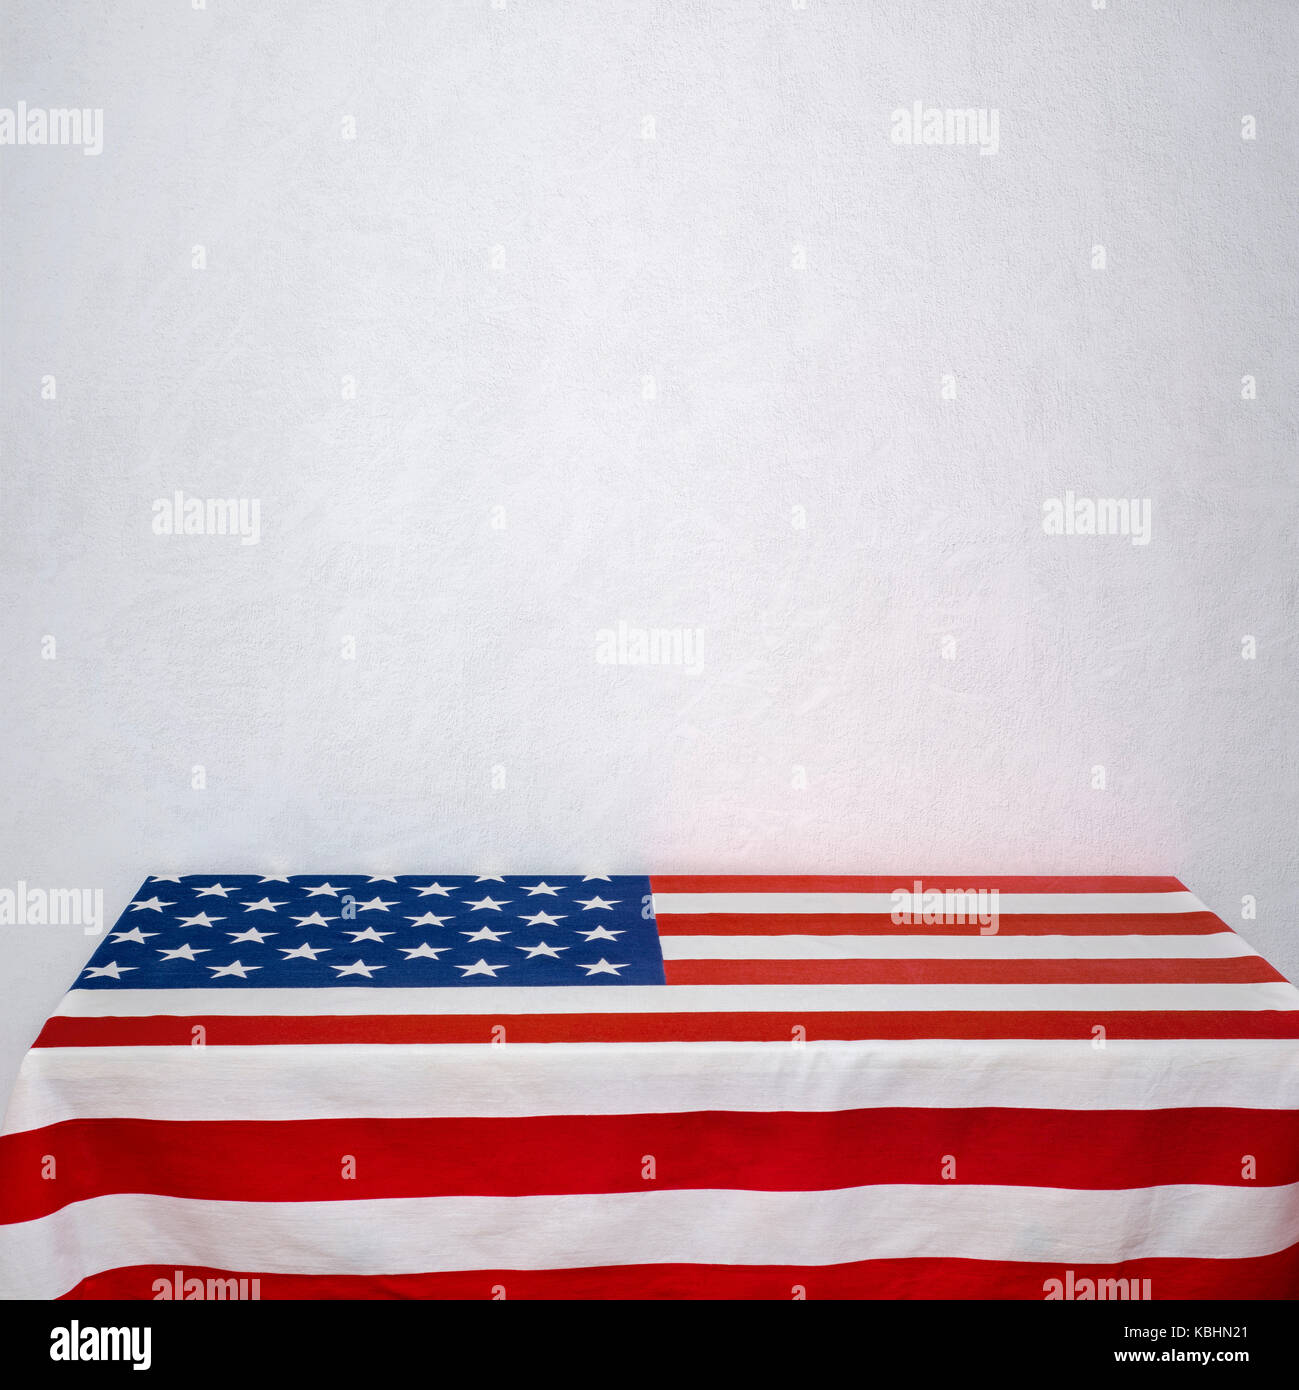 American flag table near the white stucco wall Stock Photo